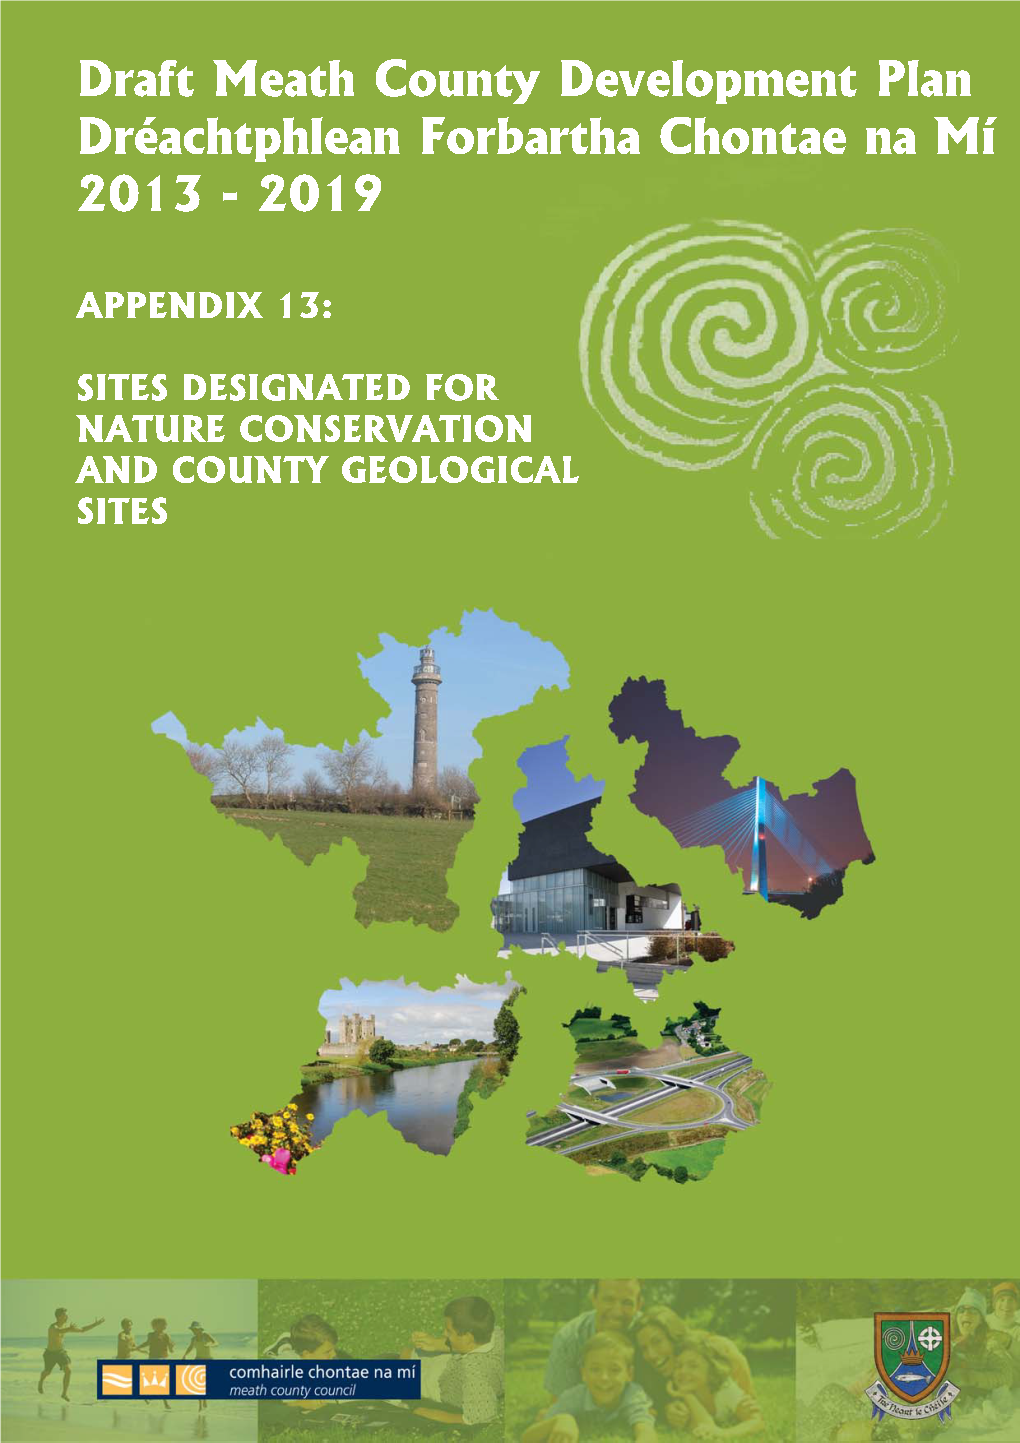 Appendix 13 Sites Designated for Nature Conservation and County Geological Sites